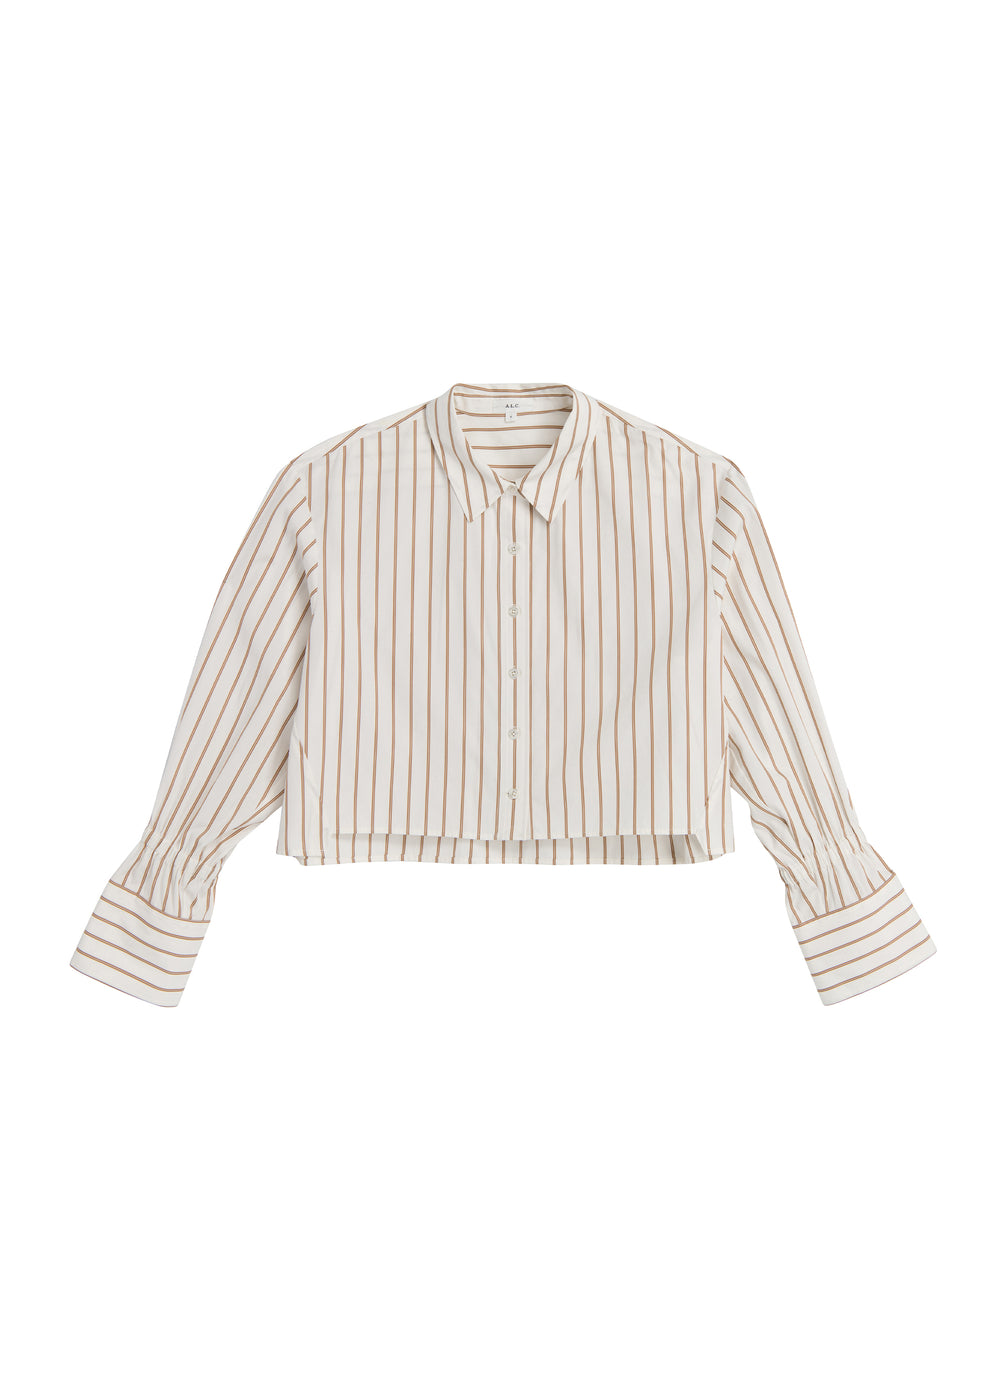 flatlay of cream and brown striped collared shirt 